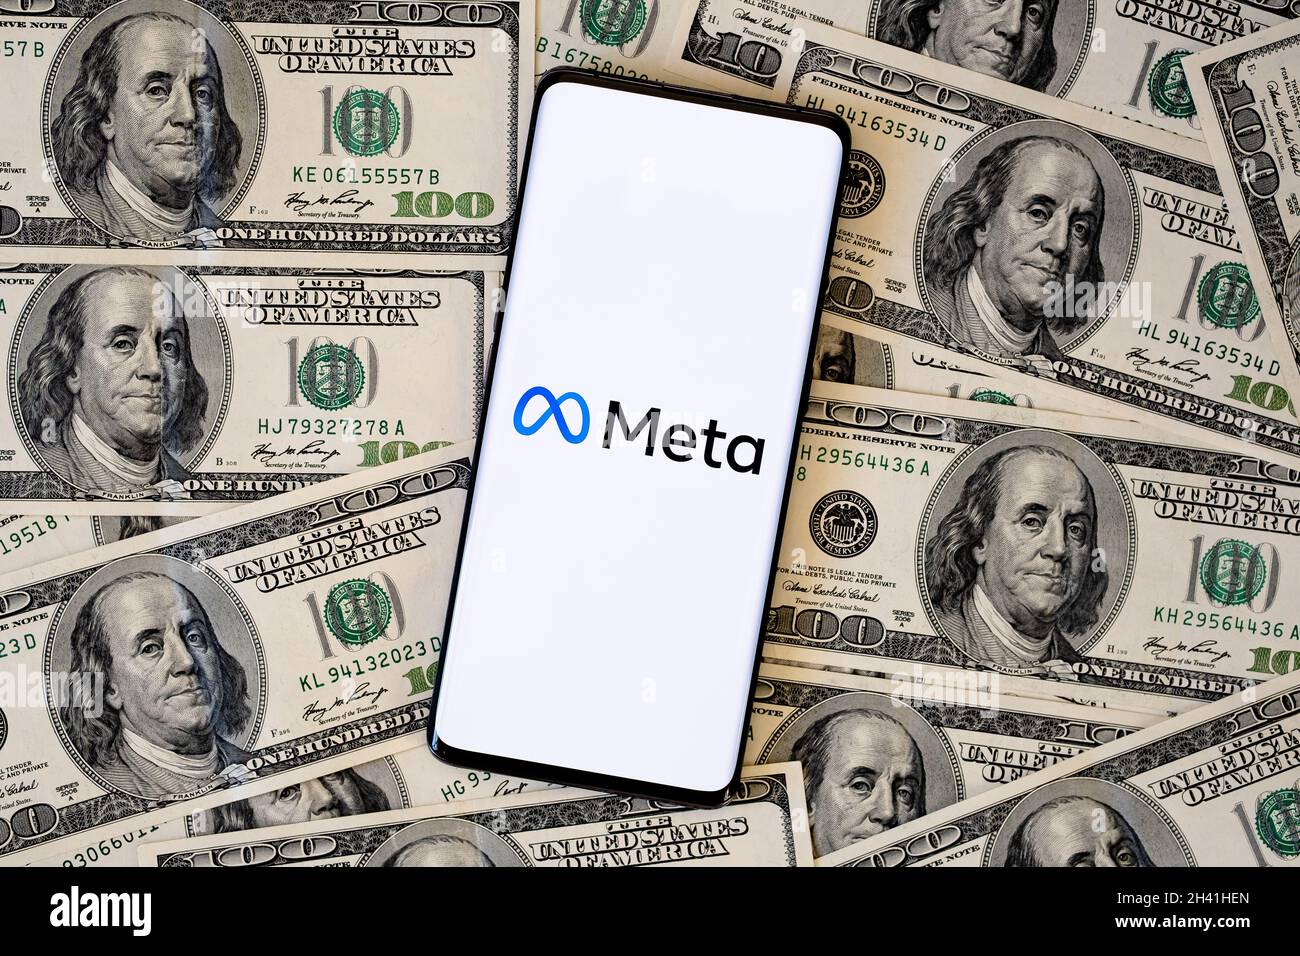 FACEBOOK META company logo seen smartphone which is placed on US dollar bills. Selective focus. Concept. Stafford, United Kingdom, October 28, 2021. Stock Photo